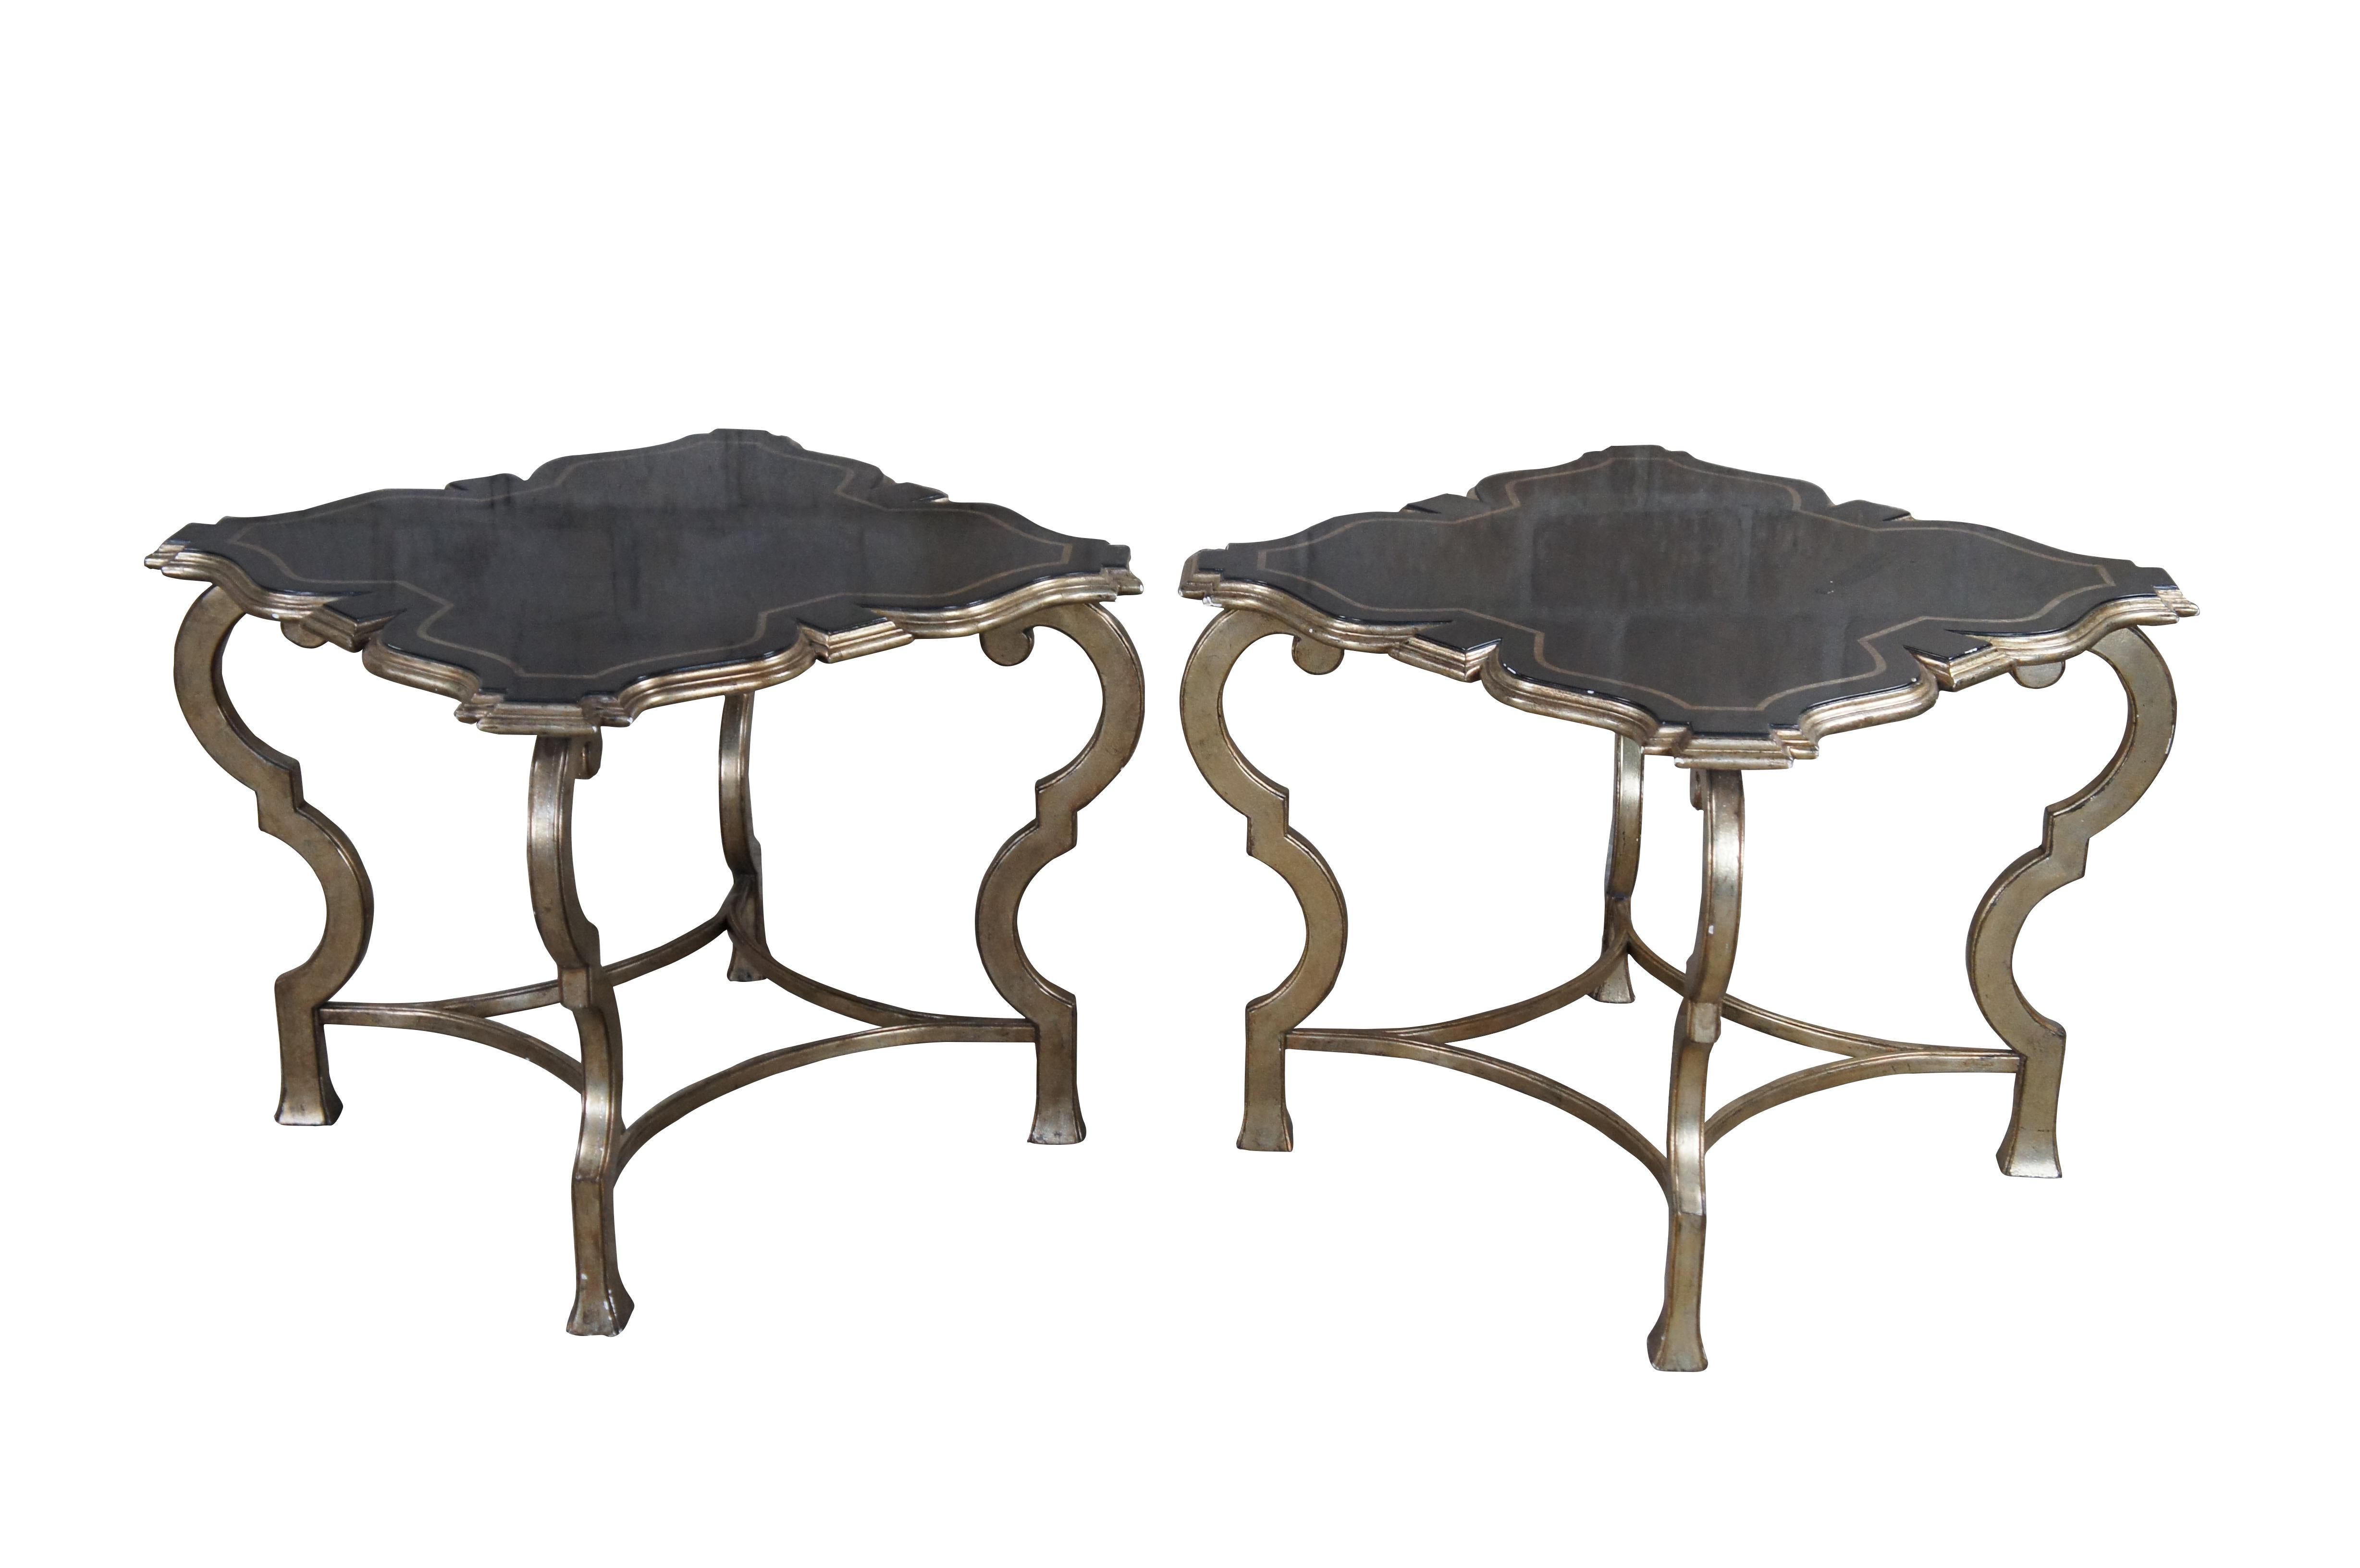 Pair of contemporary tables. Features an asymmetrical square form top with black crackle finish over ornate champagne colored bases.

Dimensions:
24